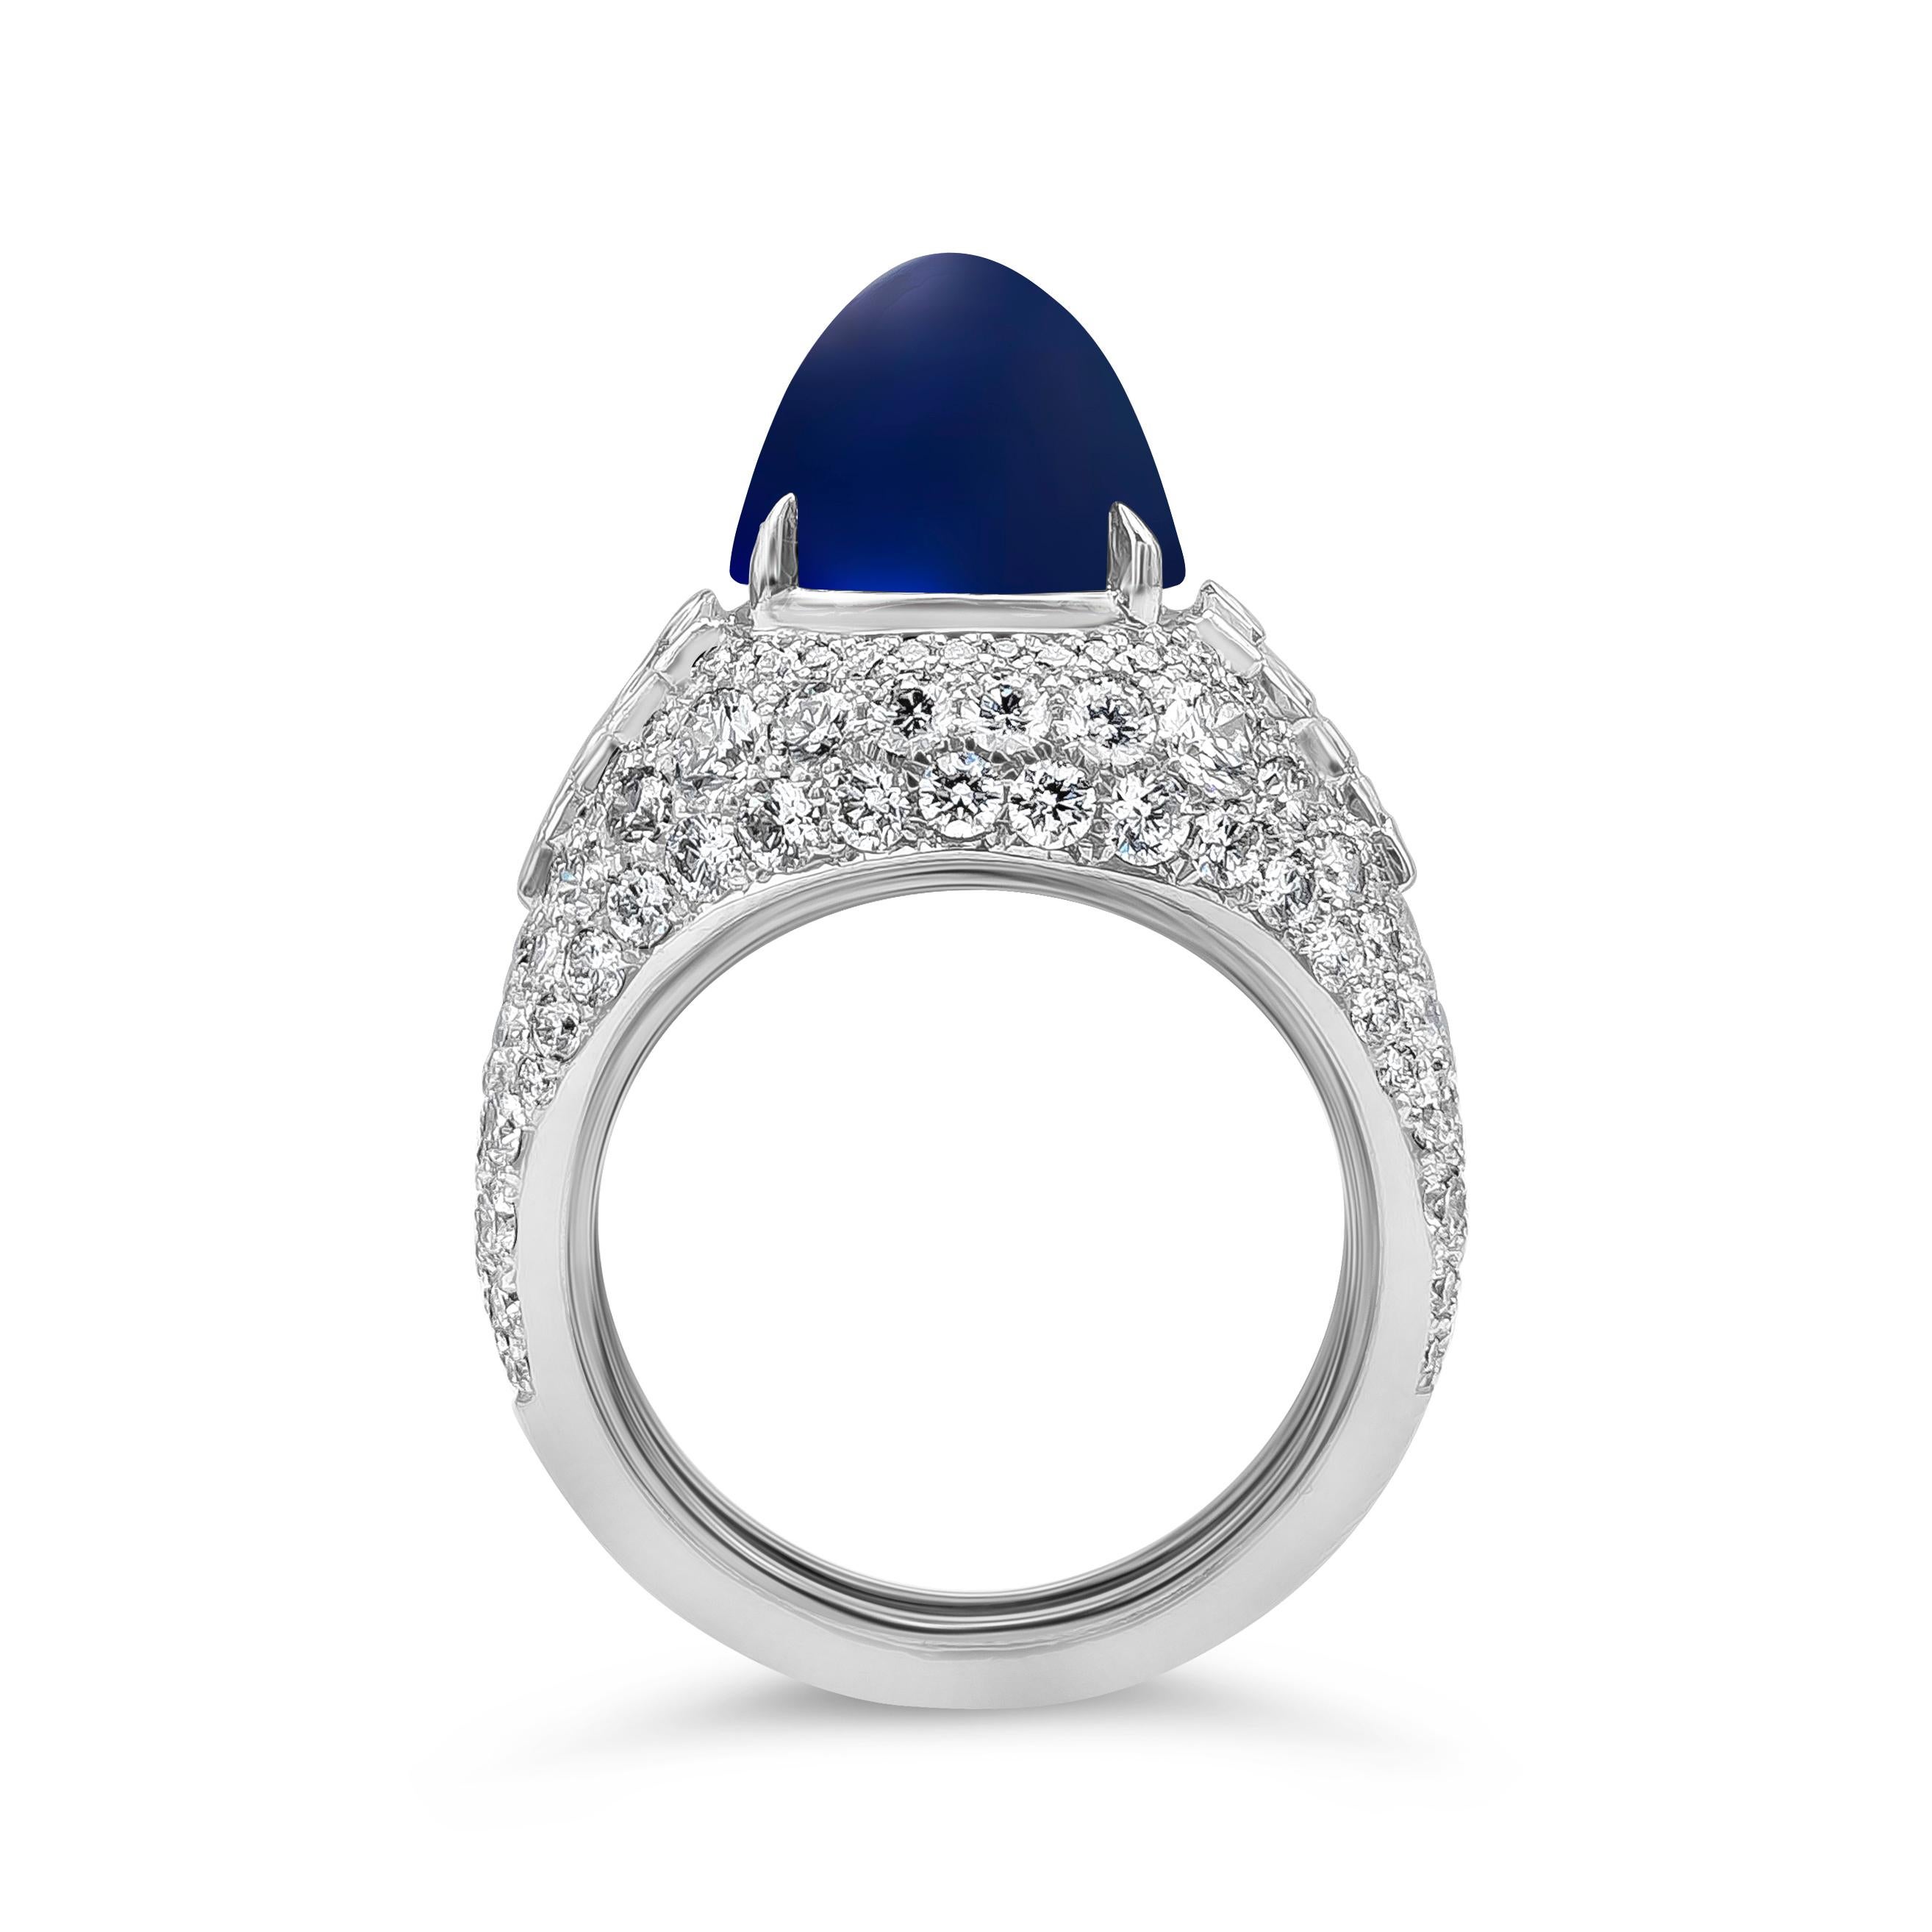 Roman Malakov 8.42 Carats Kashmir Cabochon Sapphire and Diamond Ring In New Condition For Sale In New York, NY